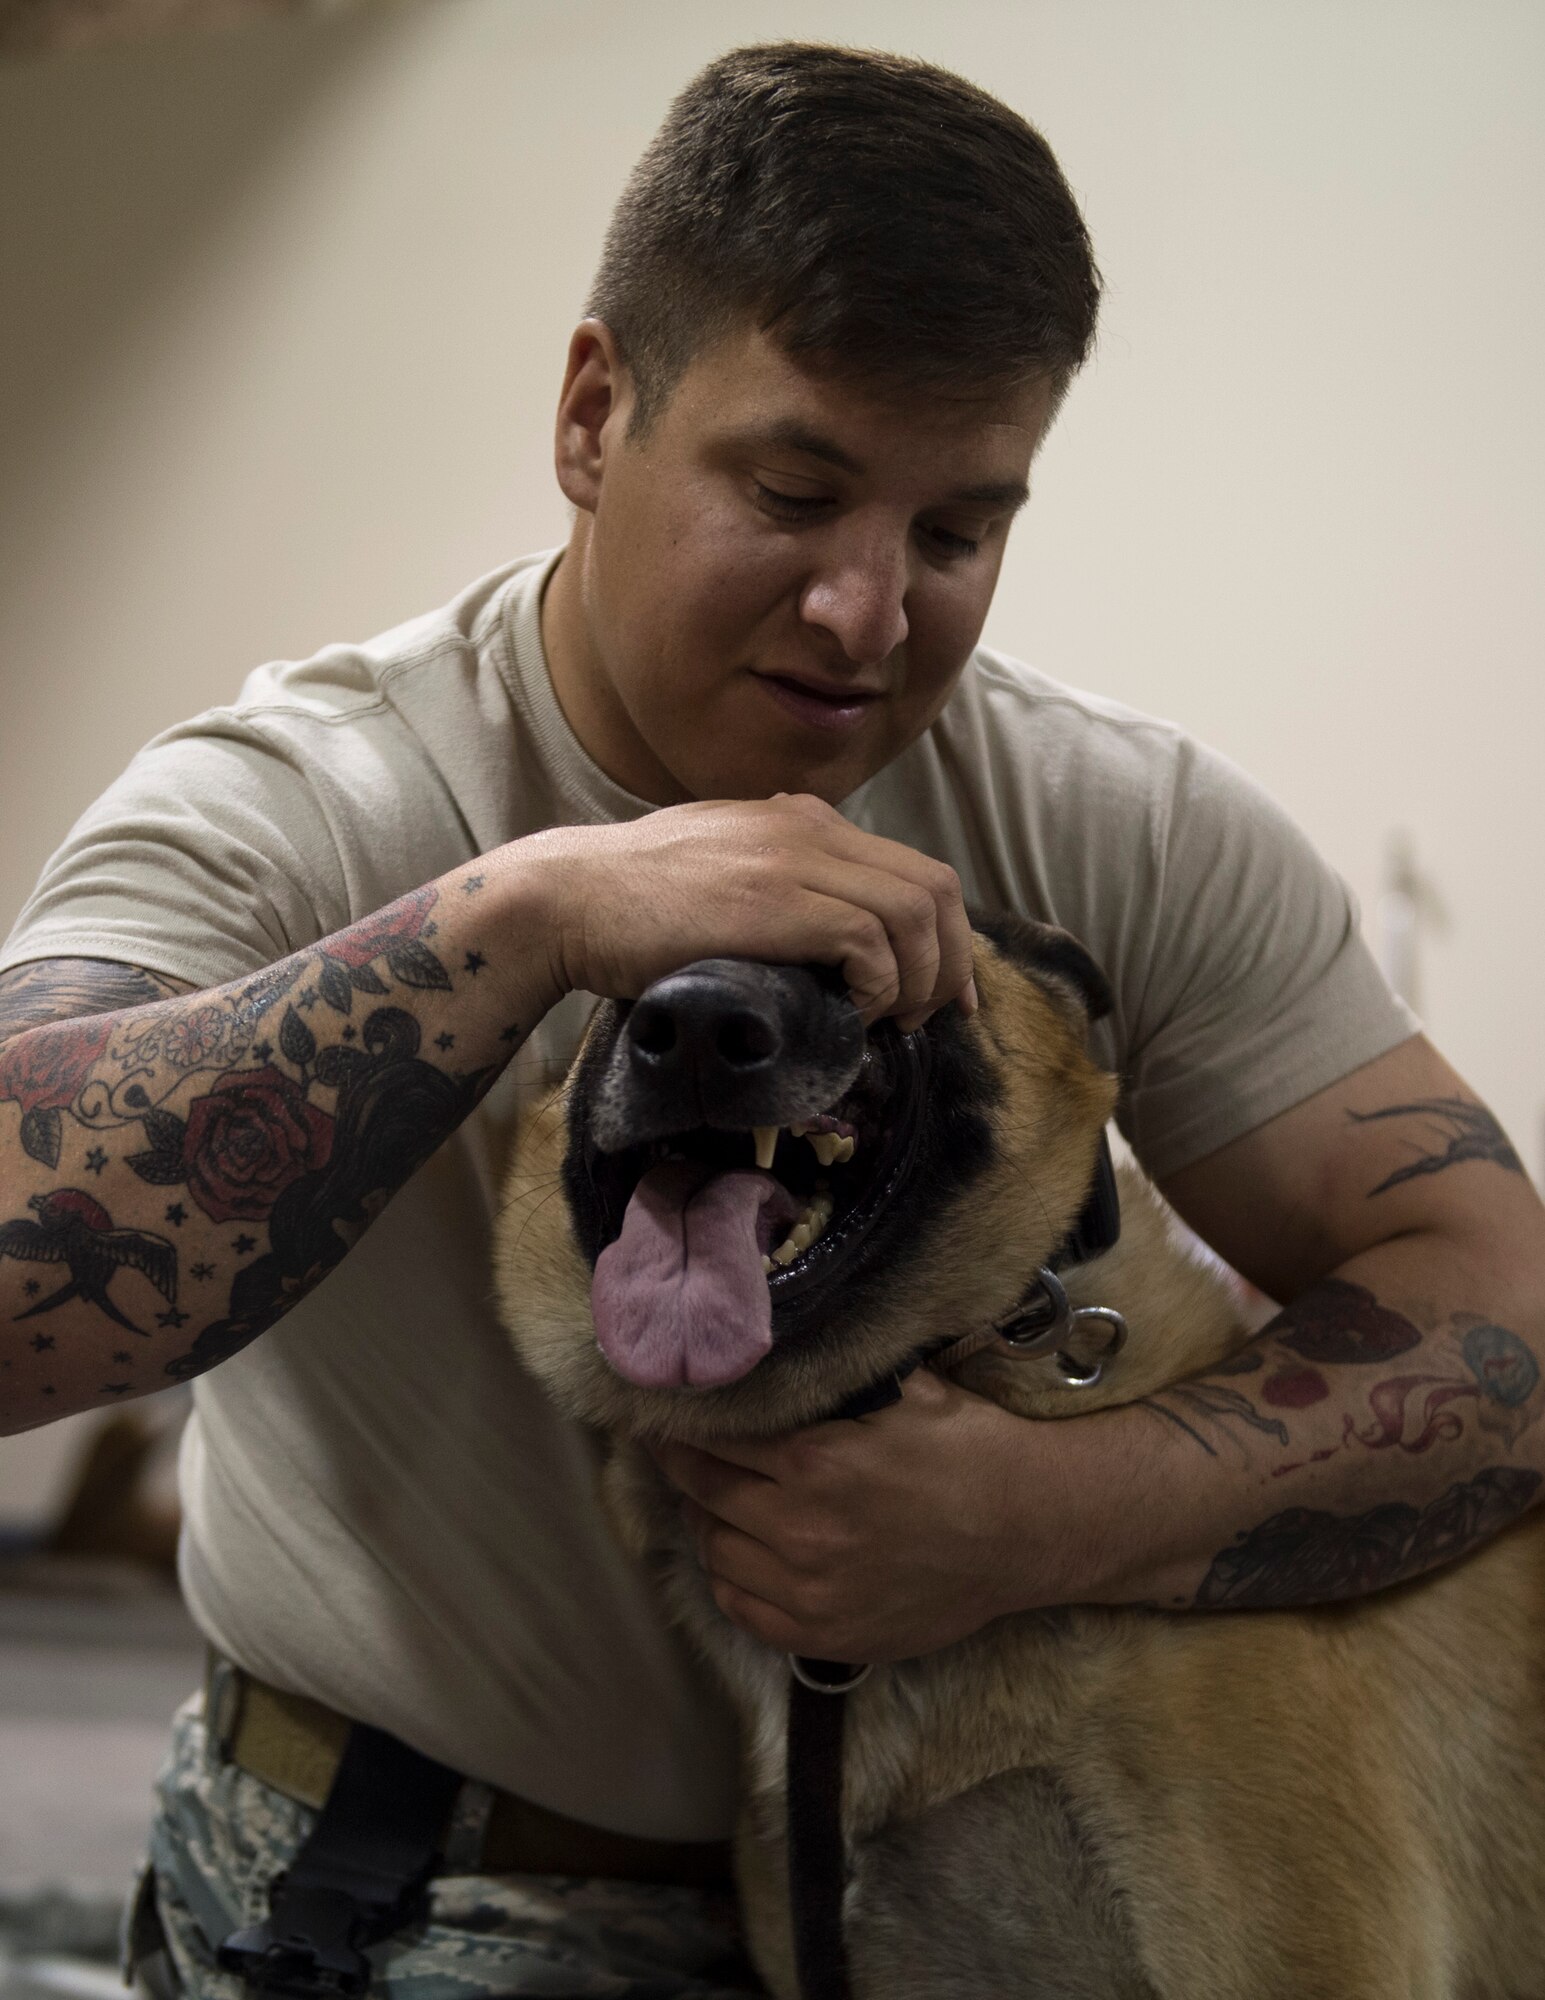 U.S. Air Force Senior Airman Kaleb Sermeno, a military working dog handler with the 379th Expeditionary Security Forces Squadron, helps his military working dog Ben show his healthy gums at Al Udeid Air Base, Qatar, April 19, 2017. U.S. Air Force Airmen from the 379th Expeditionary Aeromedical Evacuation Squadron attended the class in order to gain a better understanding of a military working dog anatomy so they can help in the event that no veterinary medical staff is available. (U.S. Air Force photo by Tech. Sgt. Amy M. Lovgren)